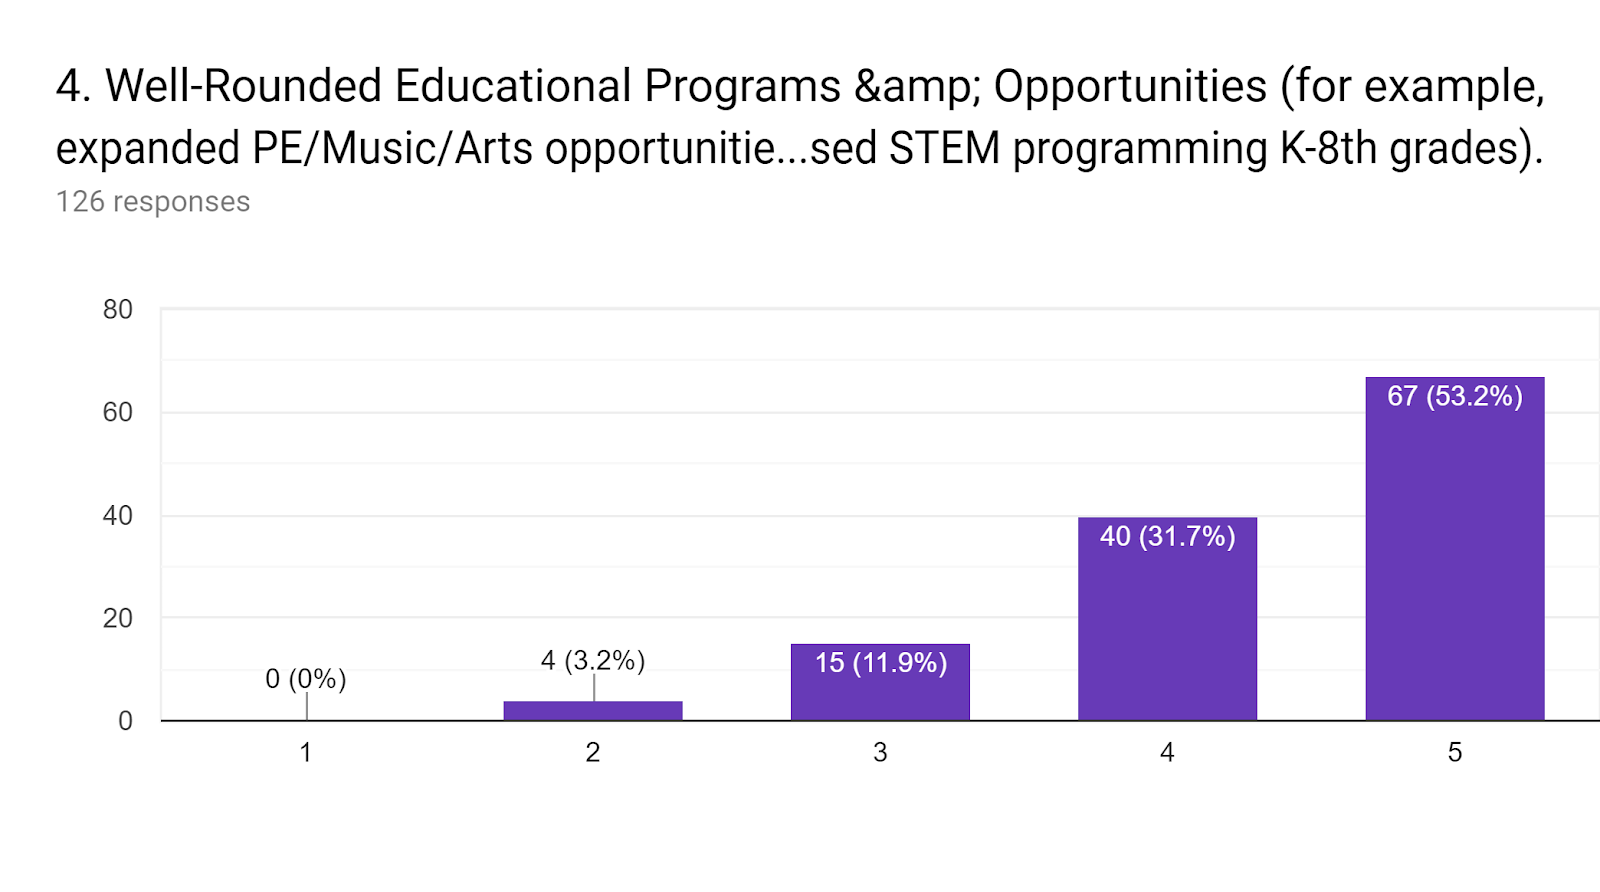 Forms response chart. Question title: 4.	Well-Rounded Educational Programs &amp; Opportunities (for example, expanded PE/Music/Arts opportunities, provide access for all students to academic programs, additional Science, Technology, Engineering and Math (STEM) options for high school, increased STEM programming K-8th grades).. Number of responses: 126 responses.